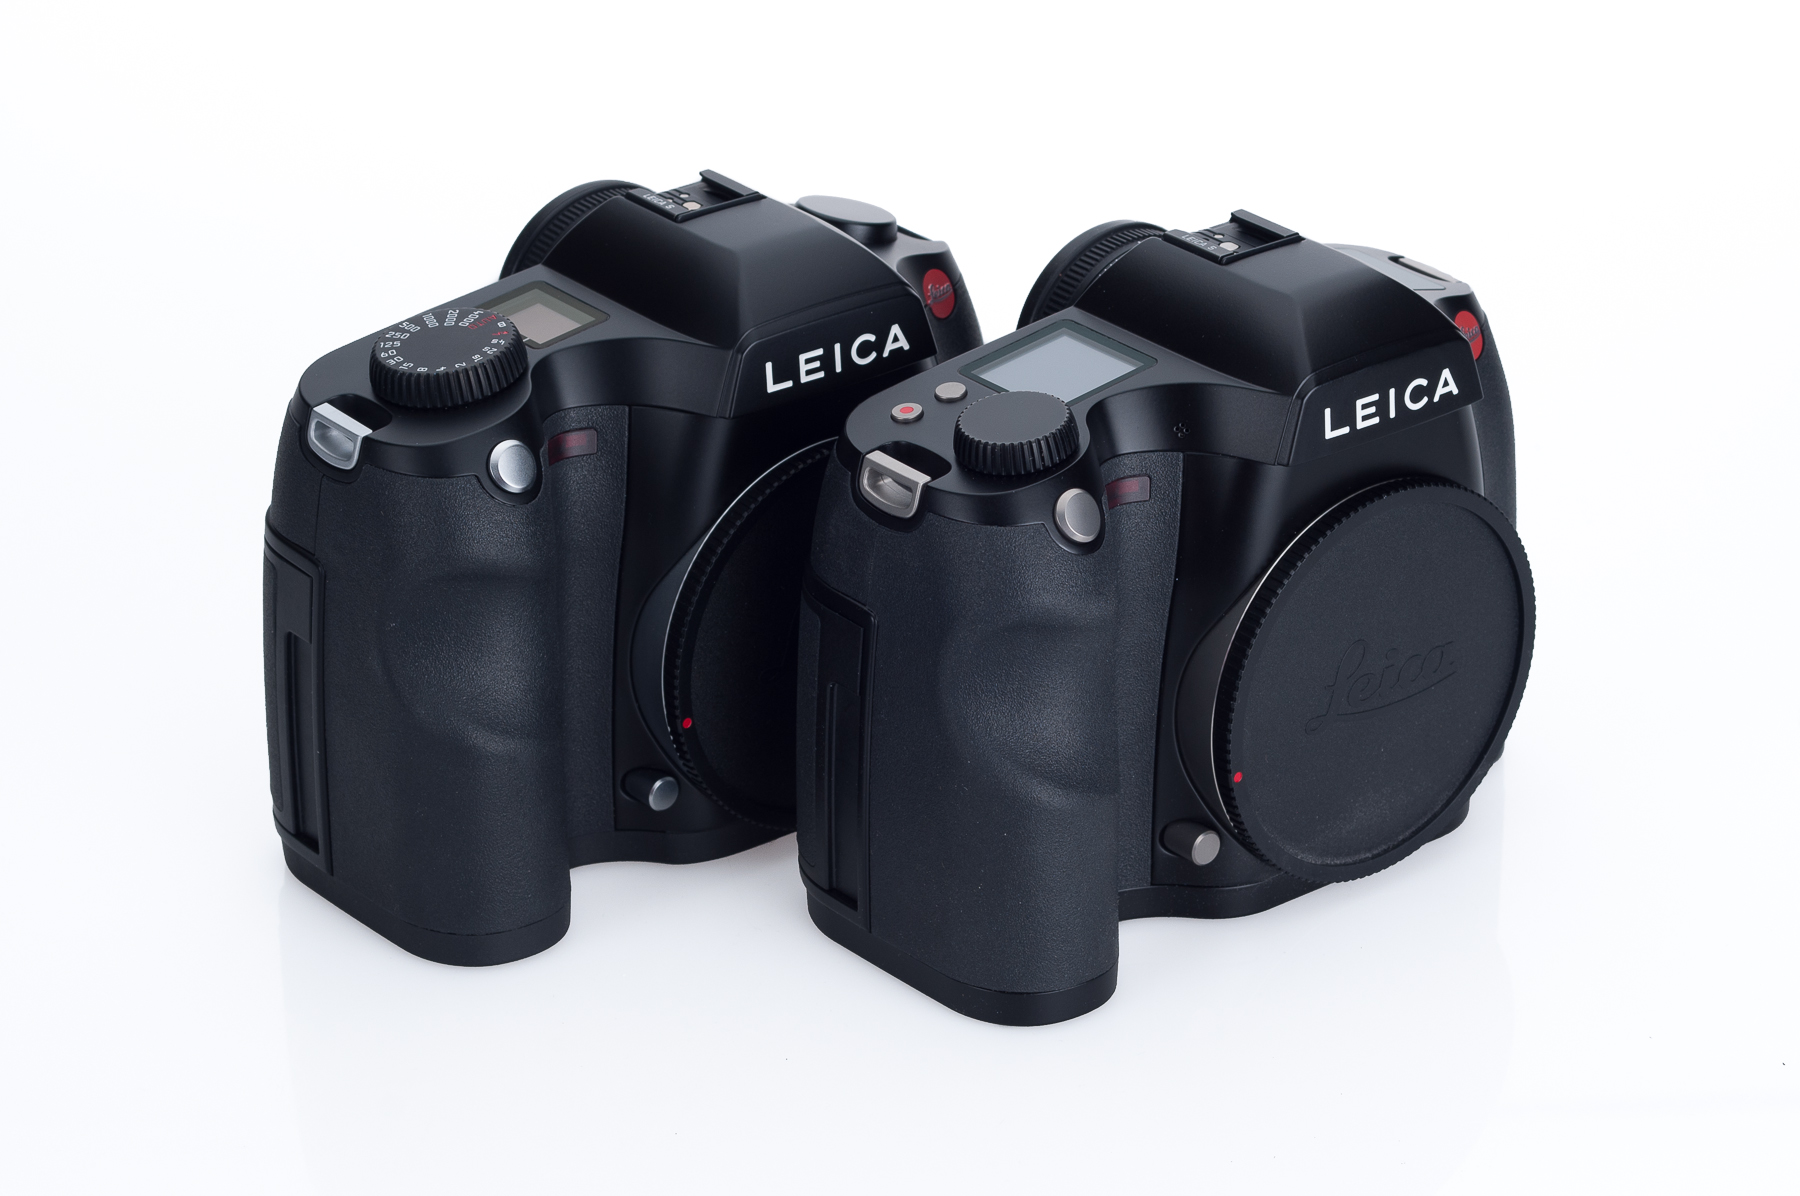 LEICA S3 CAMERA specs examined by Master Photographer Oz Yilmaz as he explains the key features of the new Leica S3 camera with tips on how to use it.